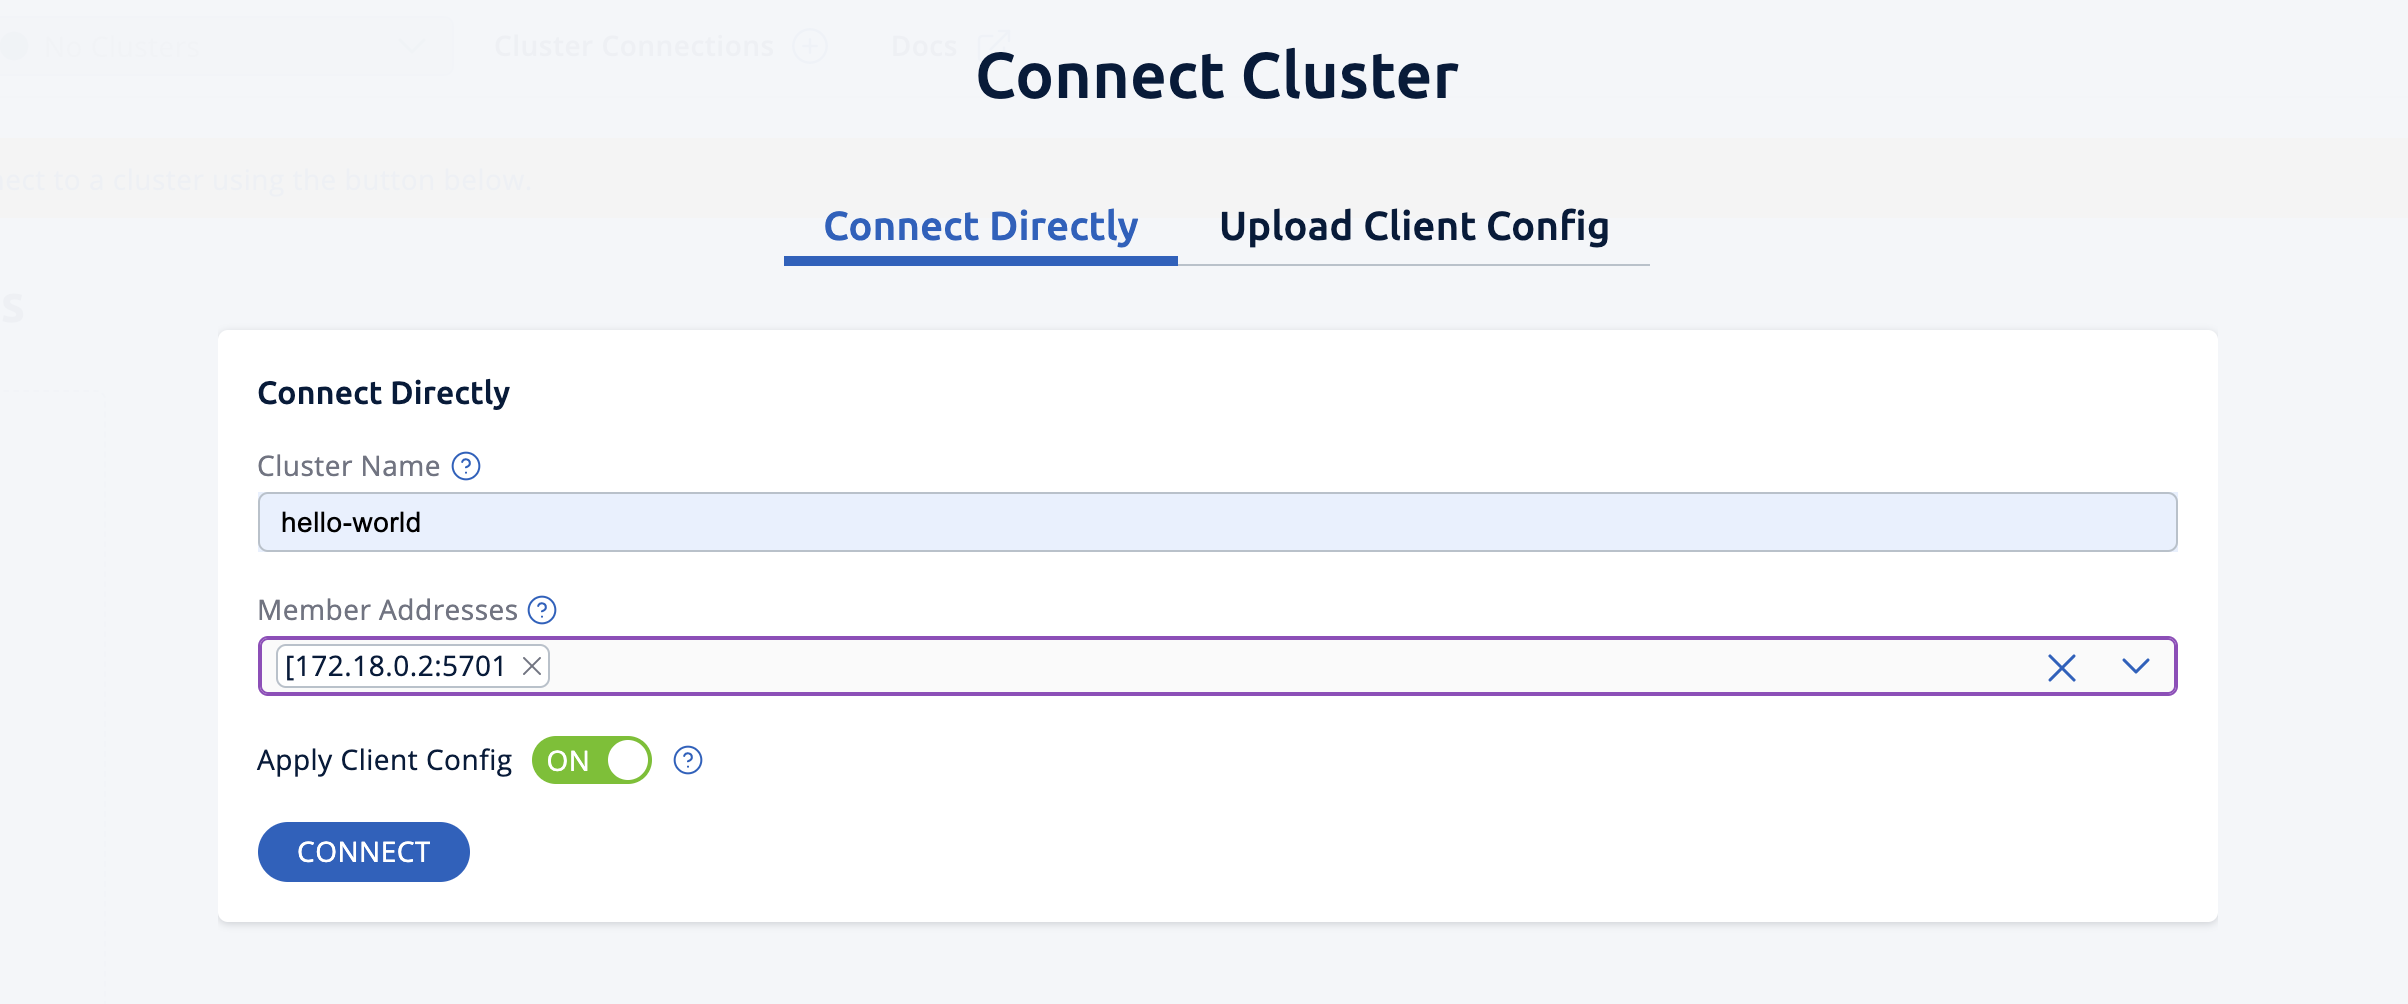 Connecting to the Hello World Cluster